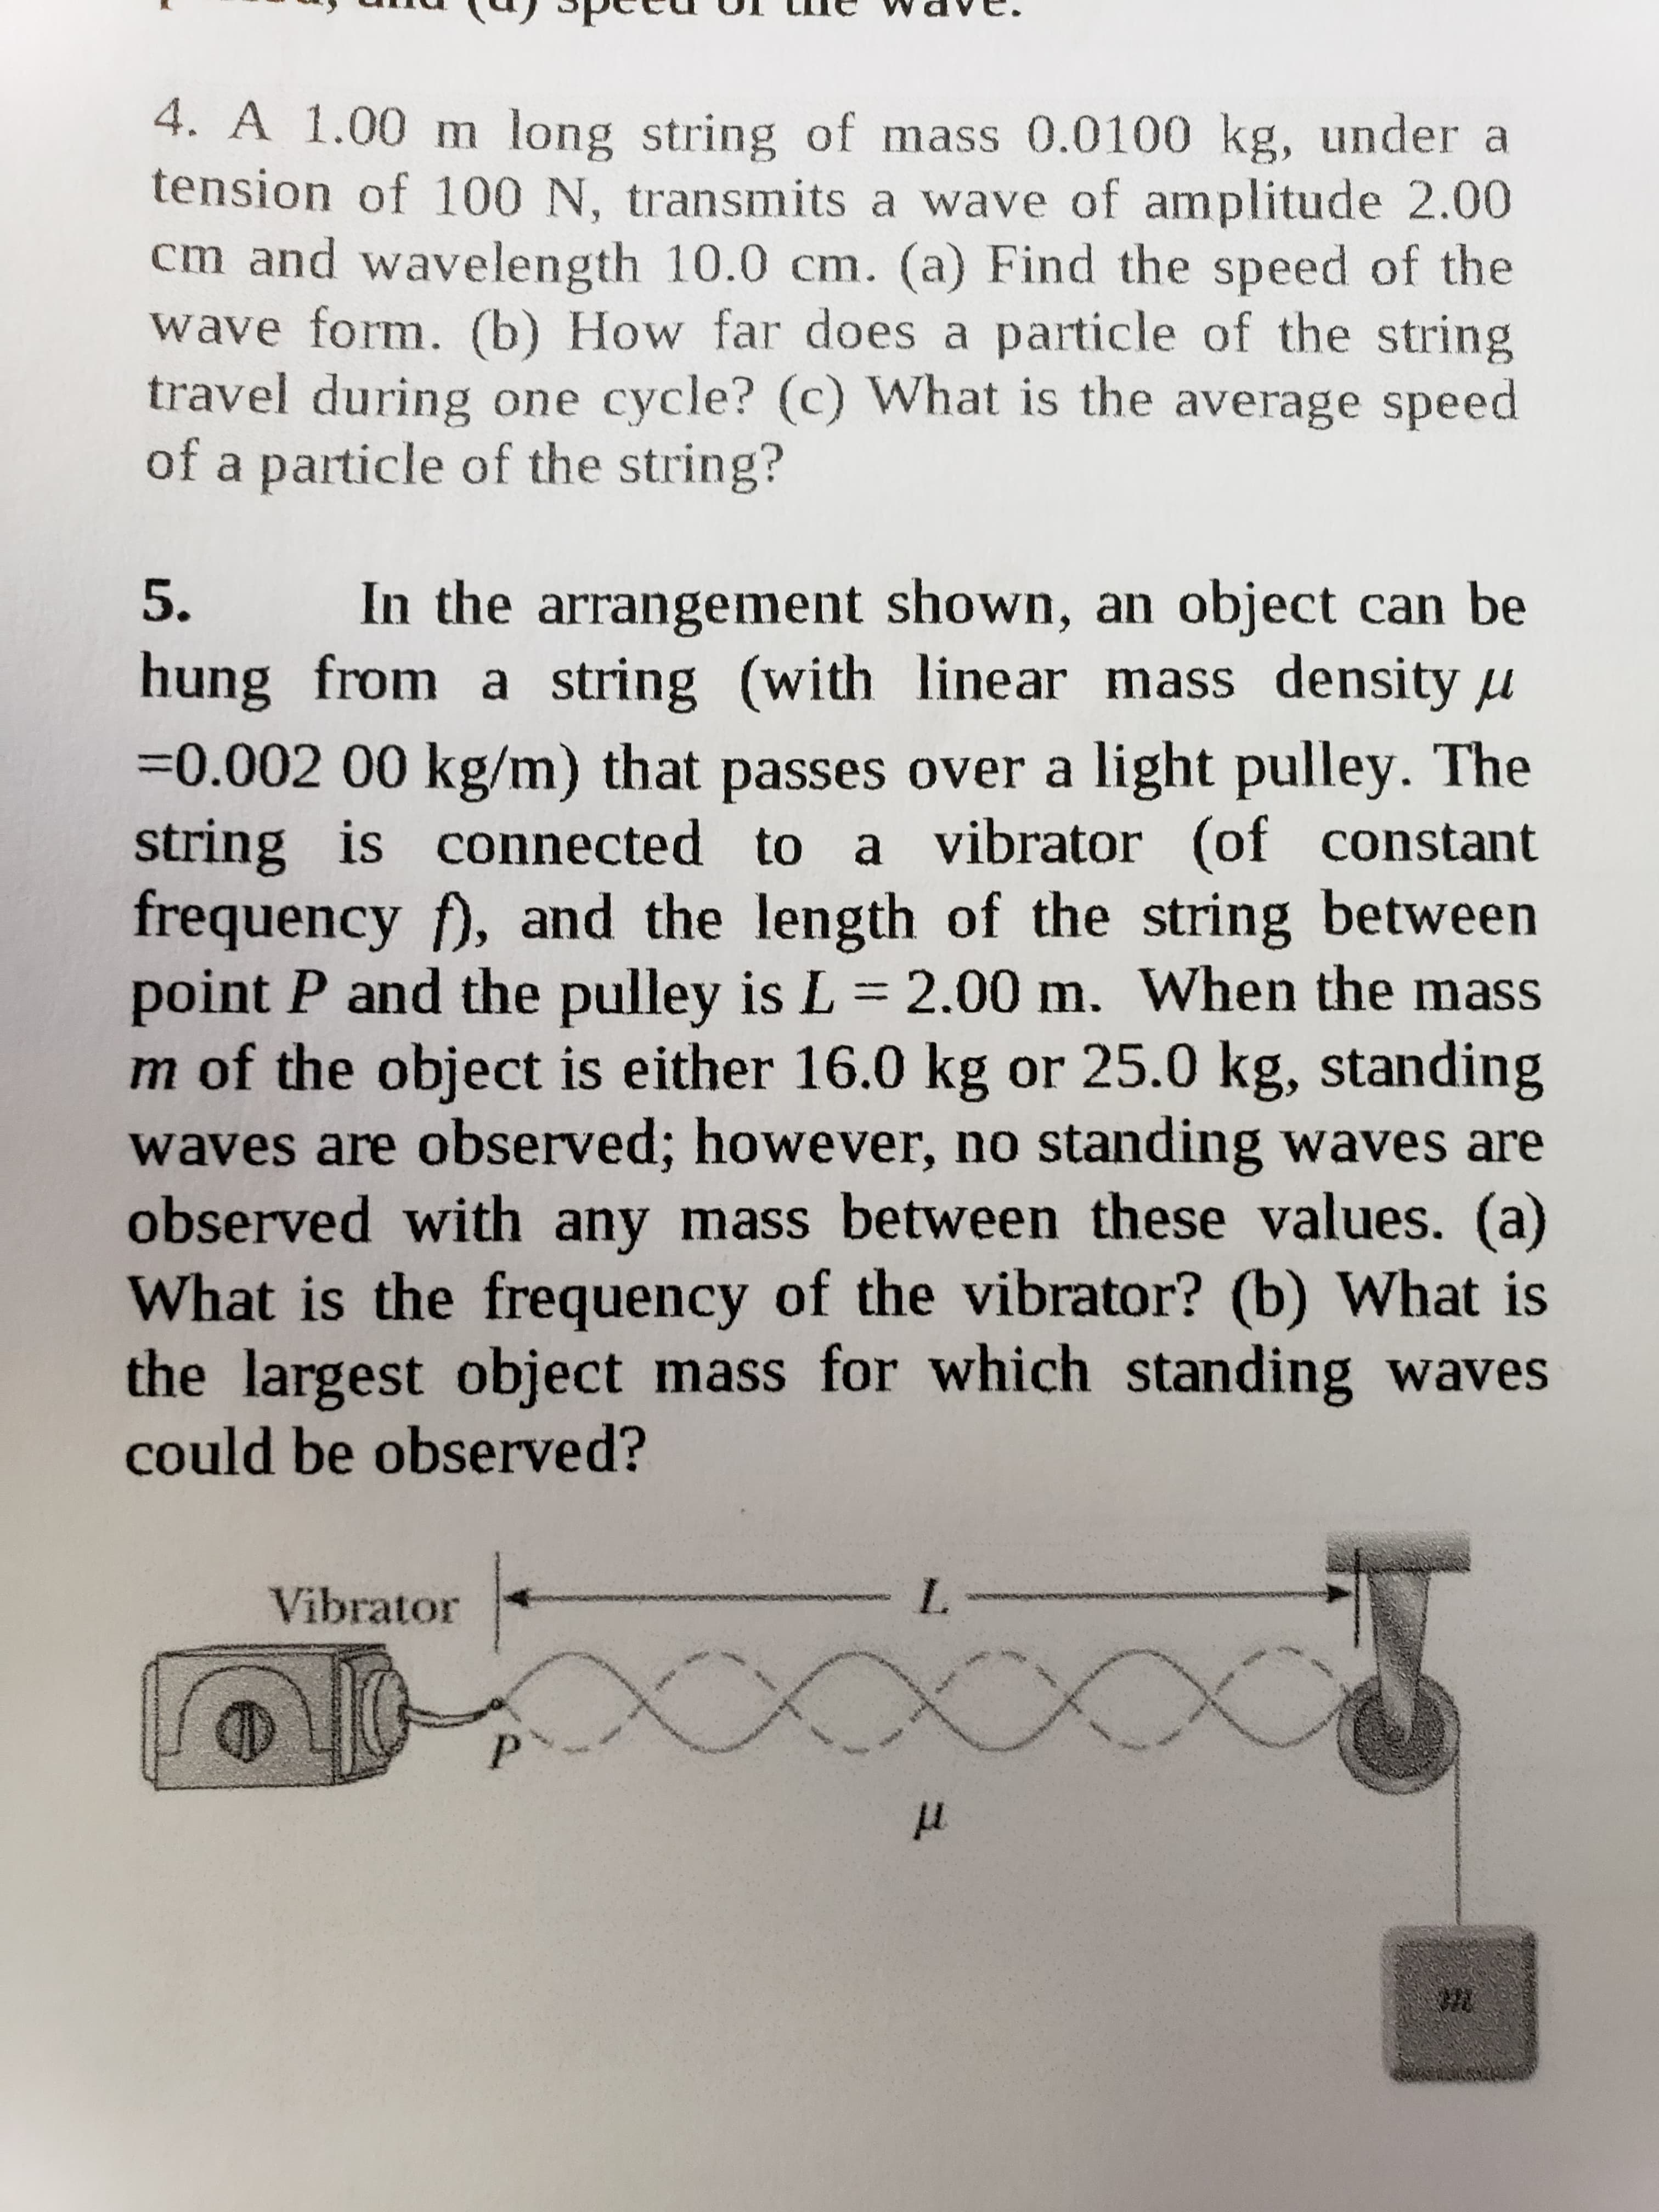 4. A 1.00 m long string of mass 0.0100 kg, under a
tension of 100 N, transmits a wave of amplitude 2.00
cm and wavelength 10.0 cm. (a) Find the speed of the
wave form. (b) How far does a particle of the string
travel during one cycle? (c) What is the average speed
of a particle of the string?
